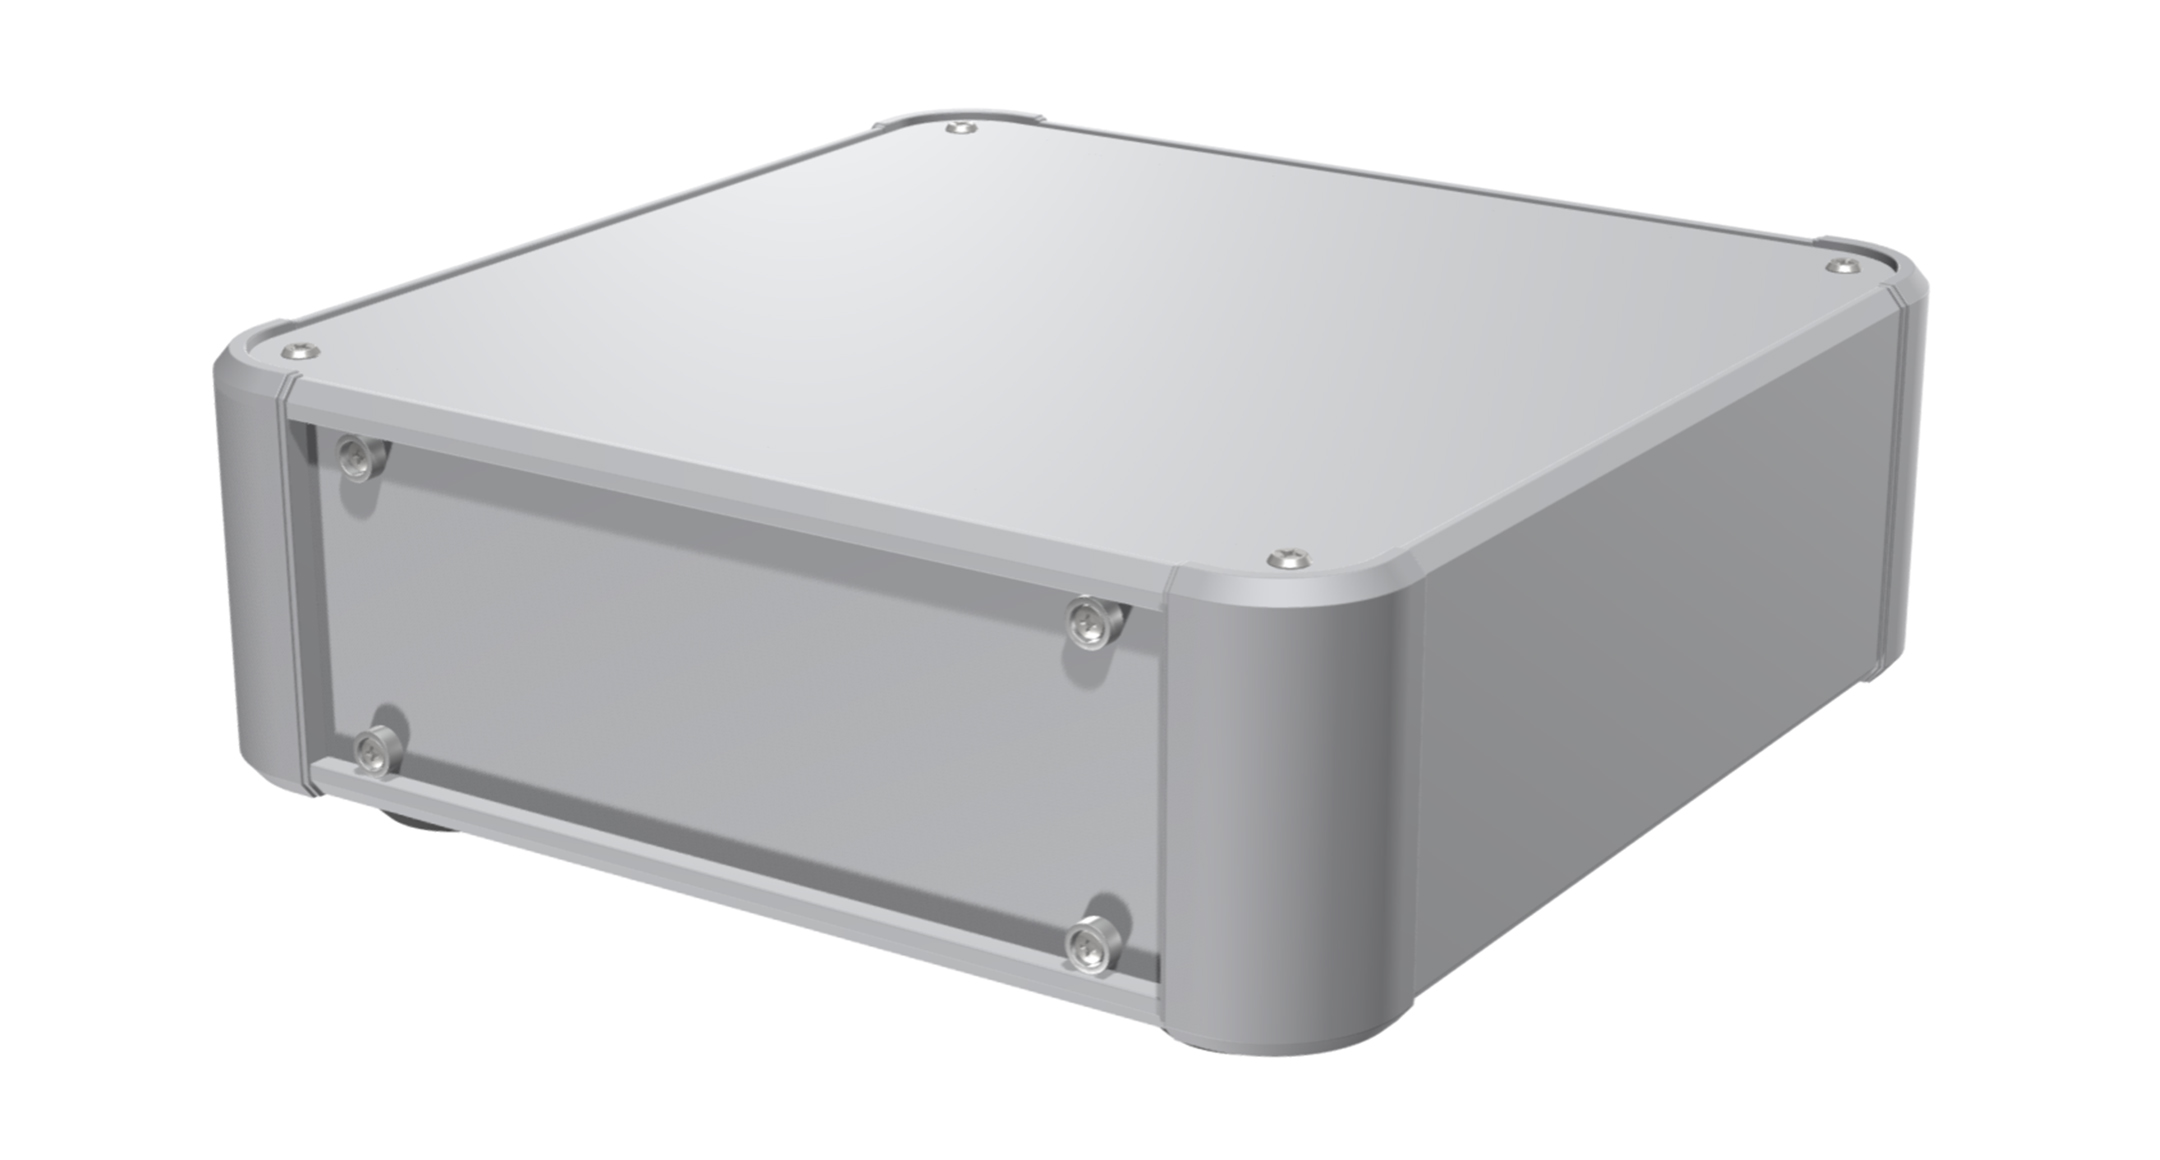 EMC SHIELDED ENCLOSURE with DETACHABLE PANELS - AUPE series:Silver